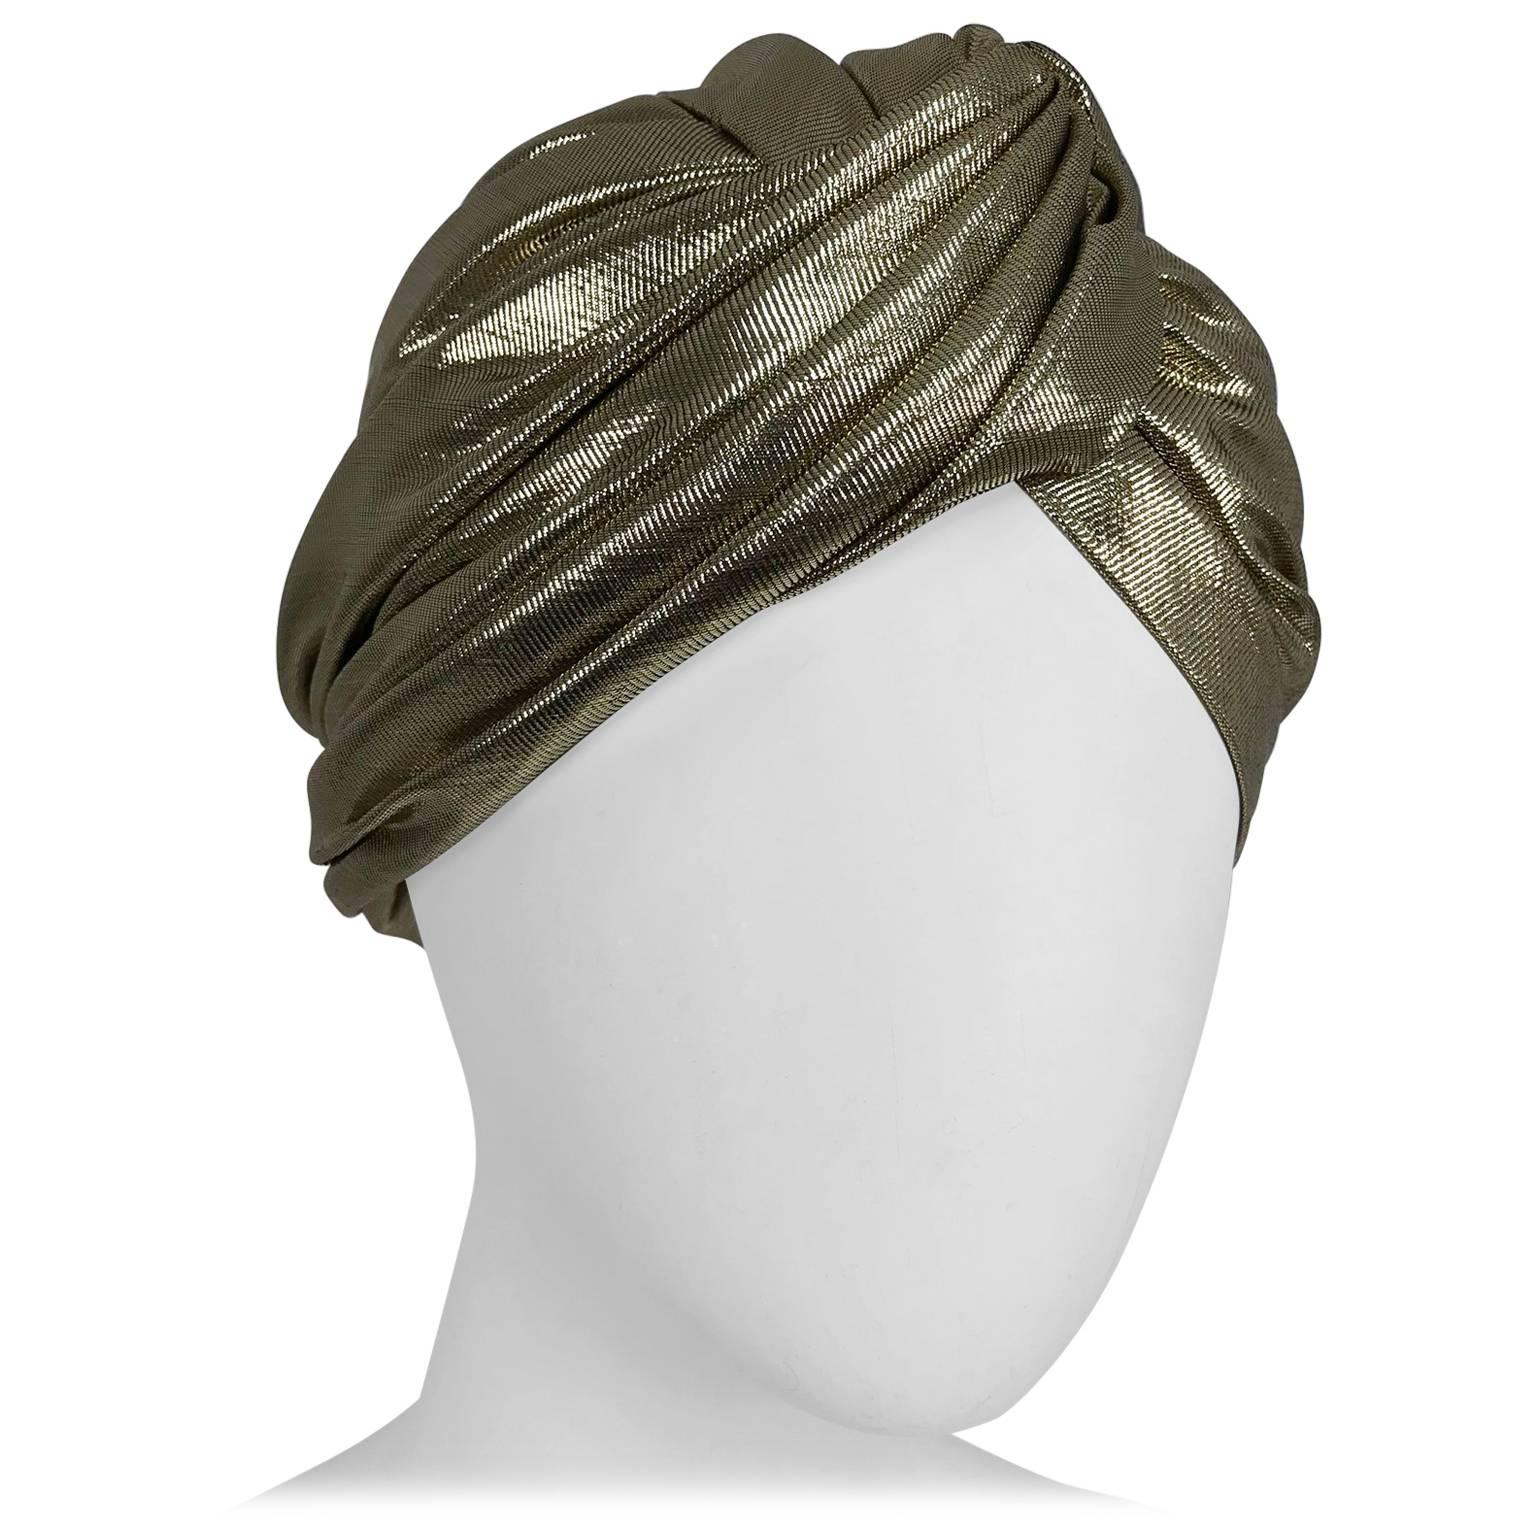 Frank Olive Private Collection Gold Lame Turban 1970s